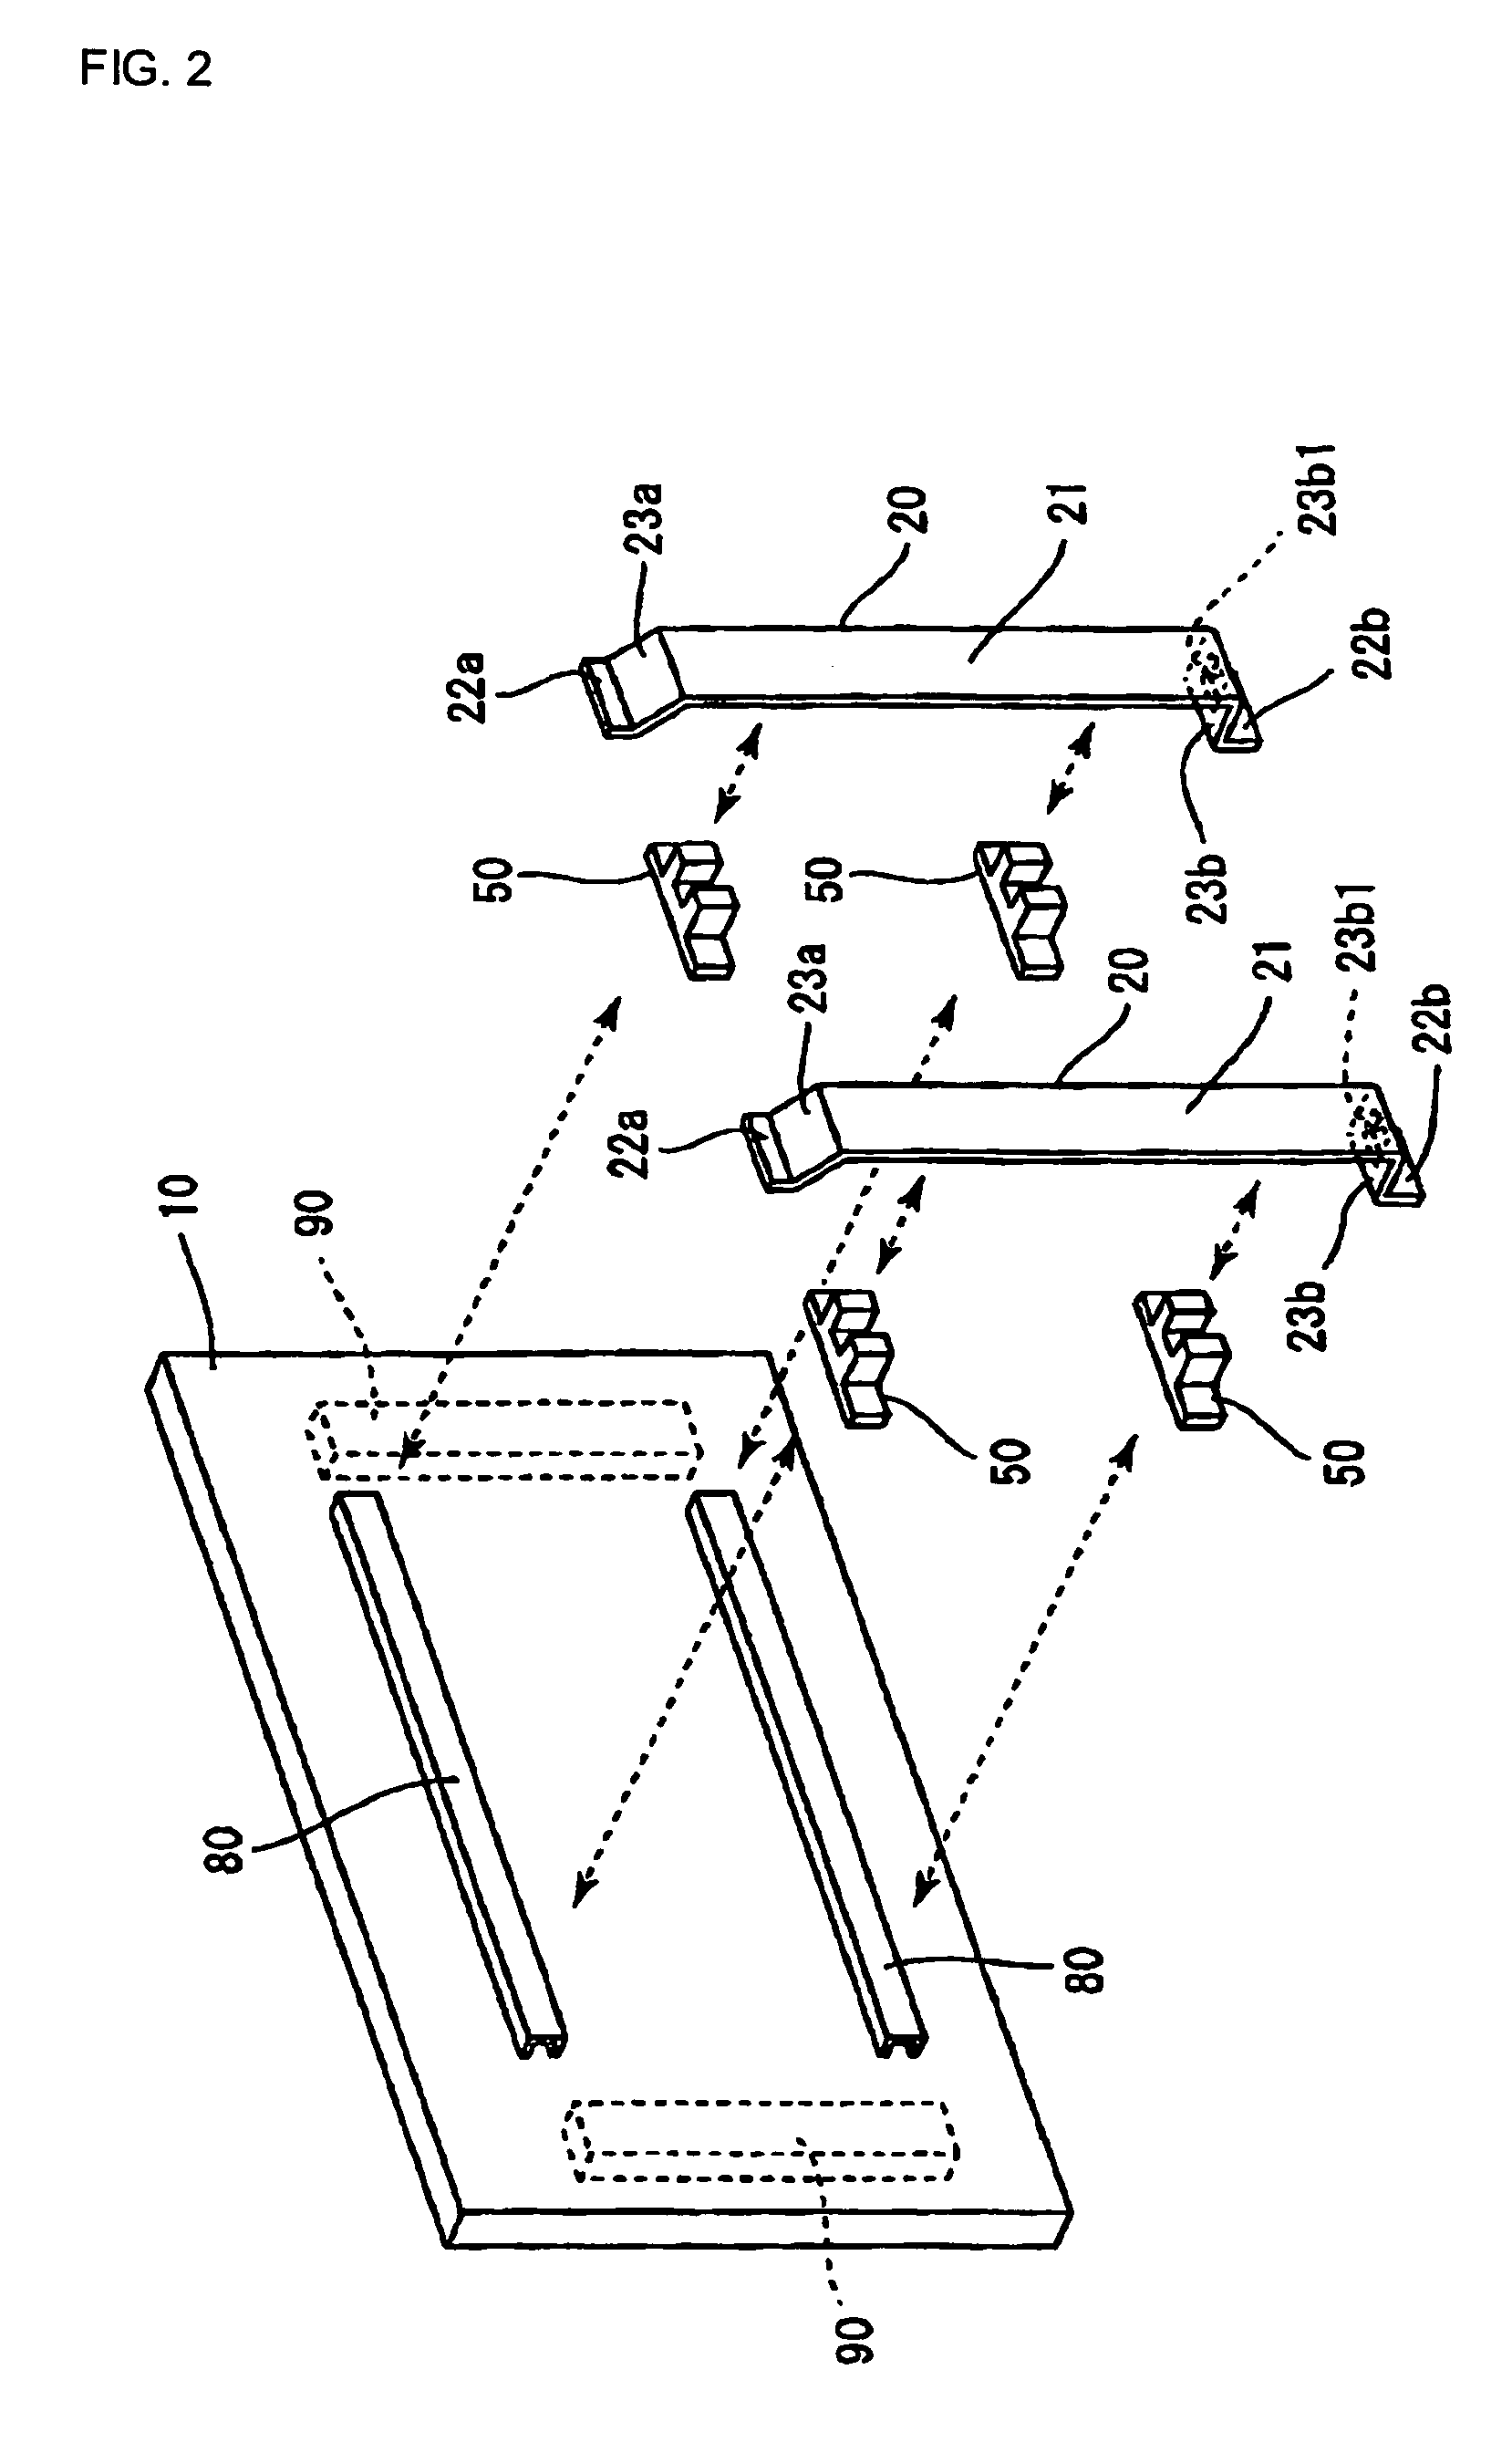 Plasma television, flat panel display fixing structure, flat panel television, and method of assembling flat panel television